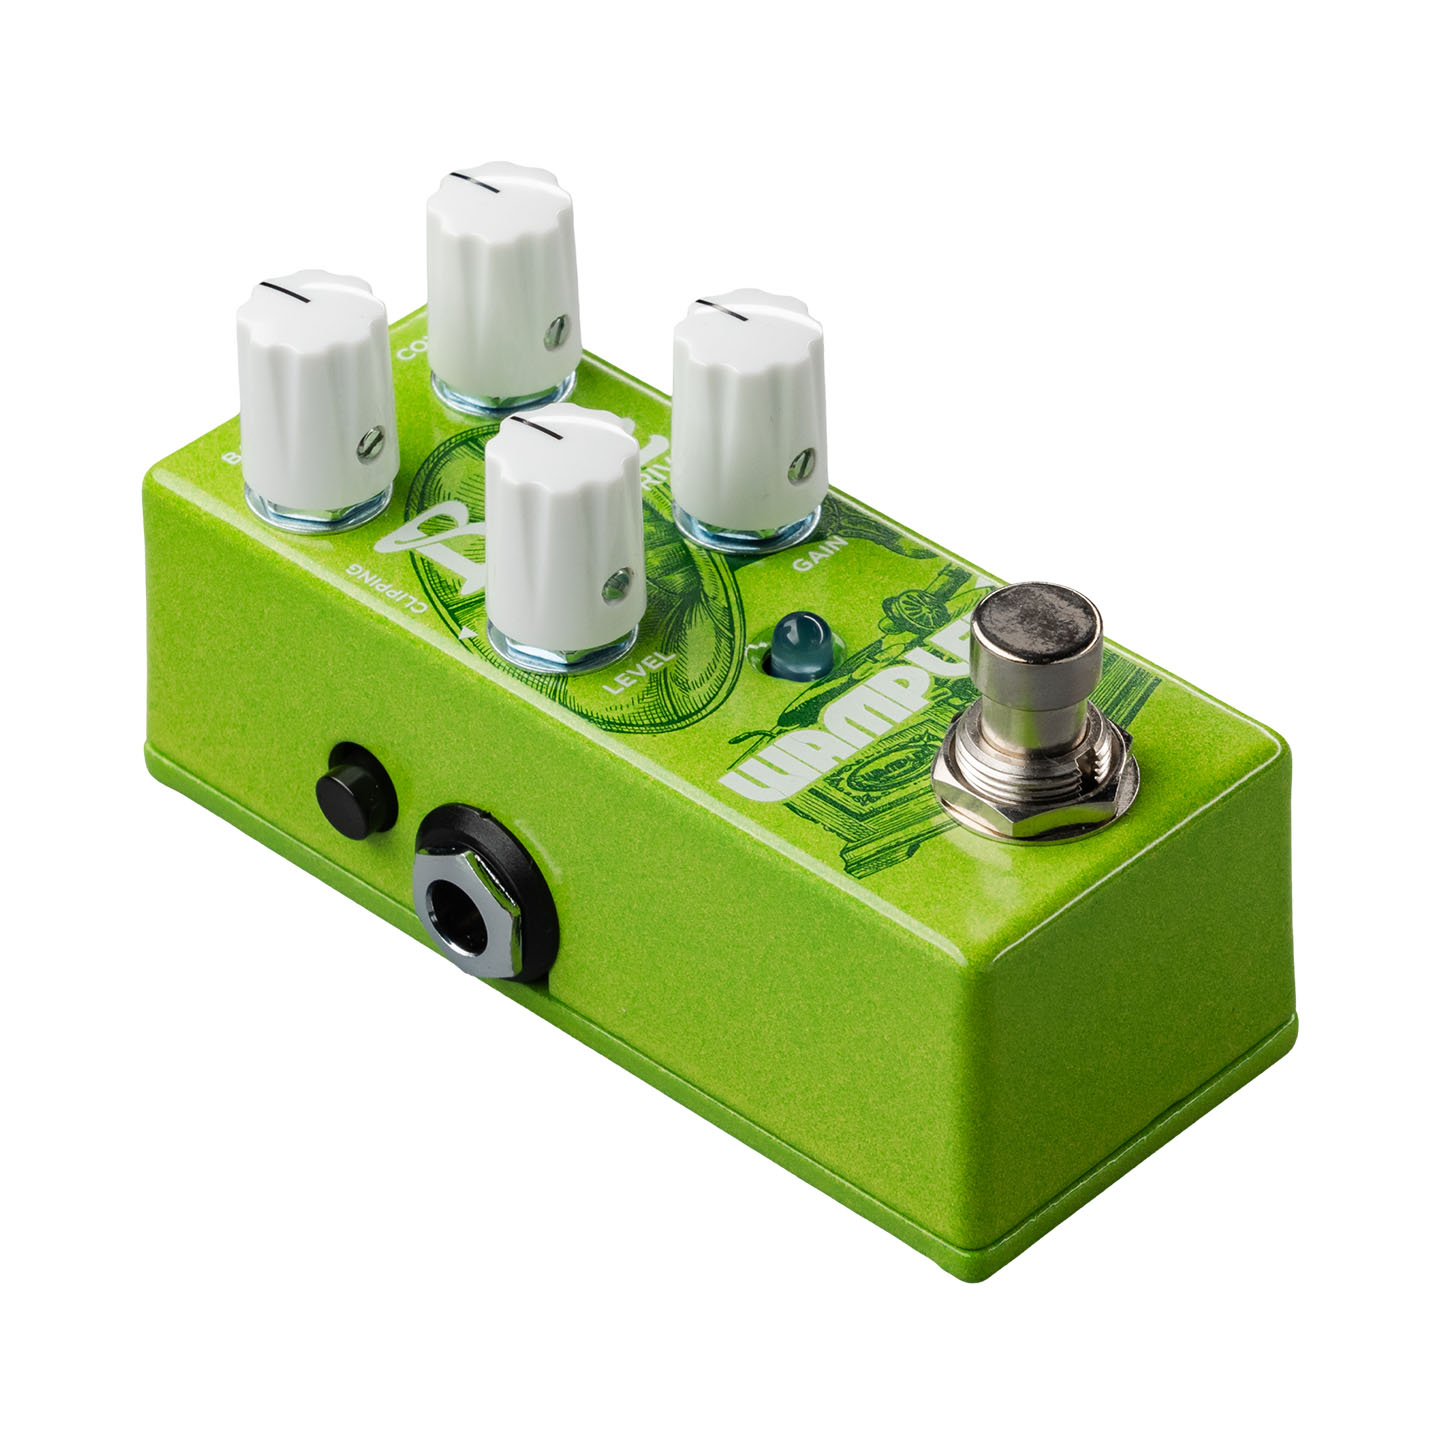 Belle Overdrive Pedal